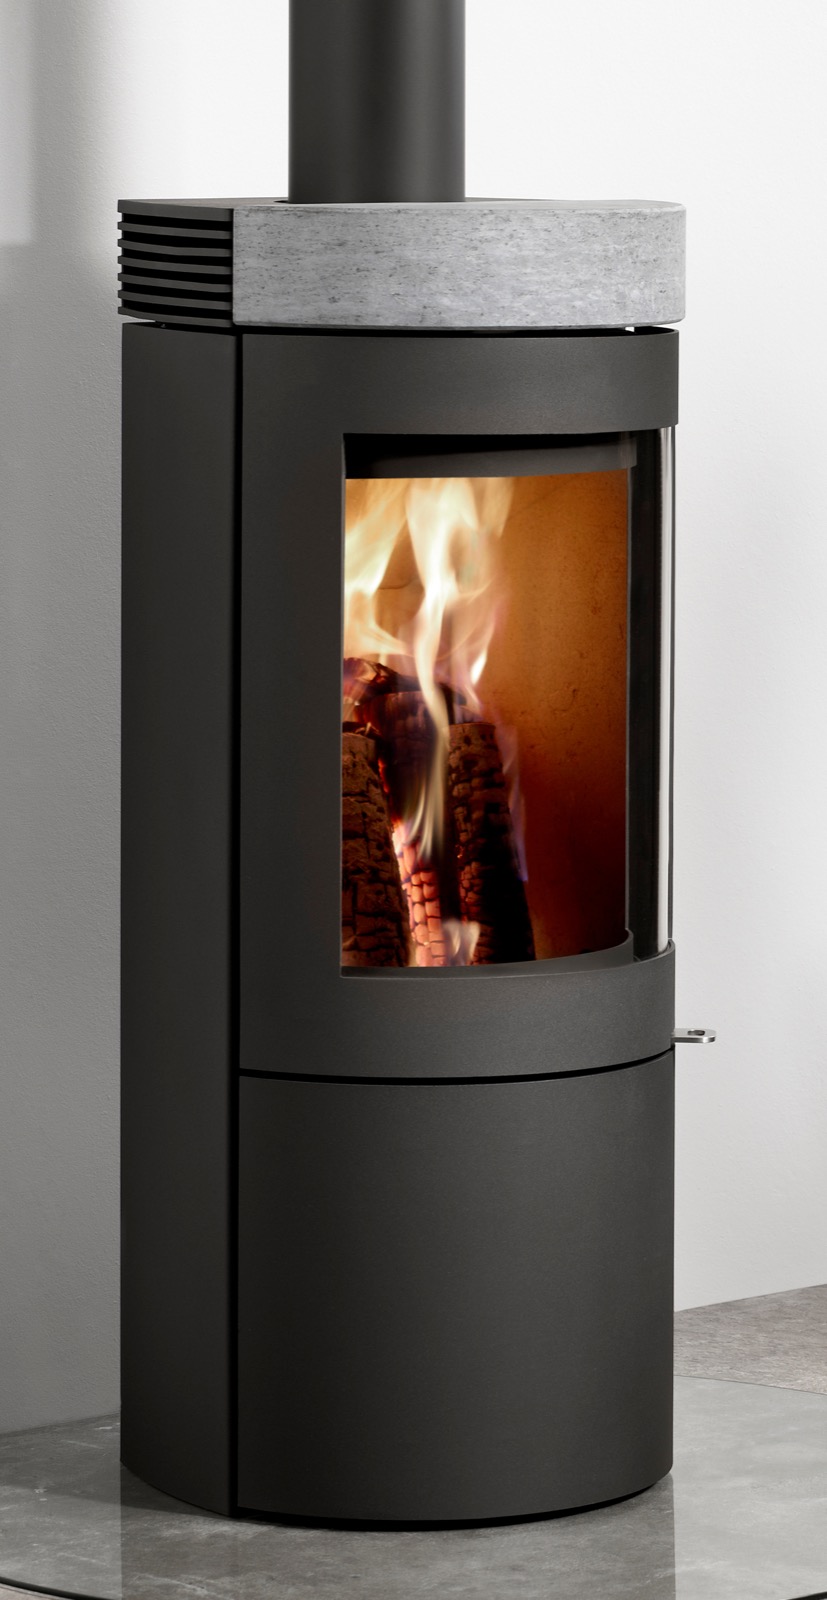 Westfire Uniq 26 Convection Wood Burning Stove in Black with Soapstone Top